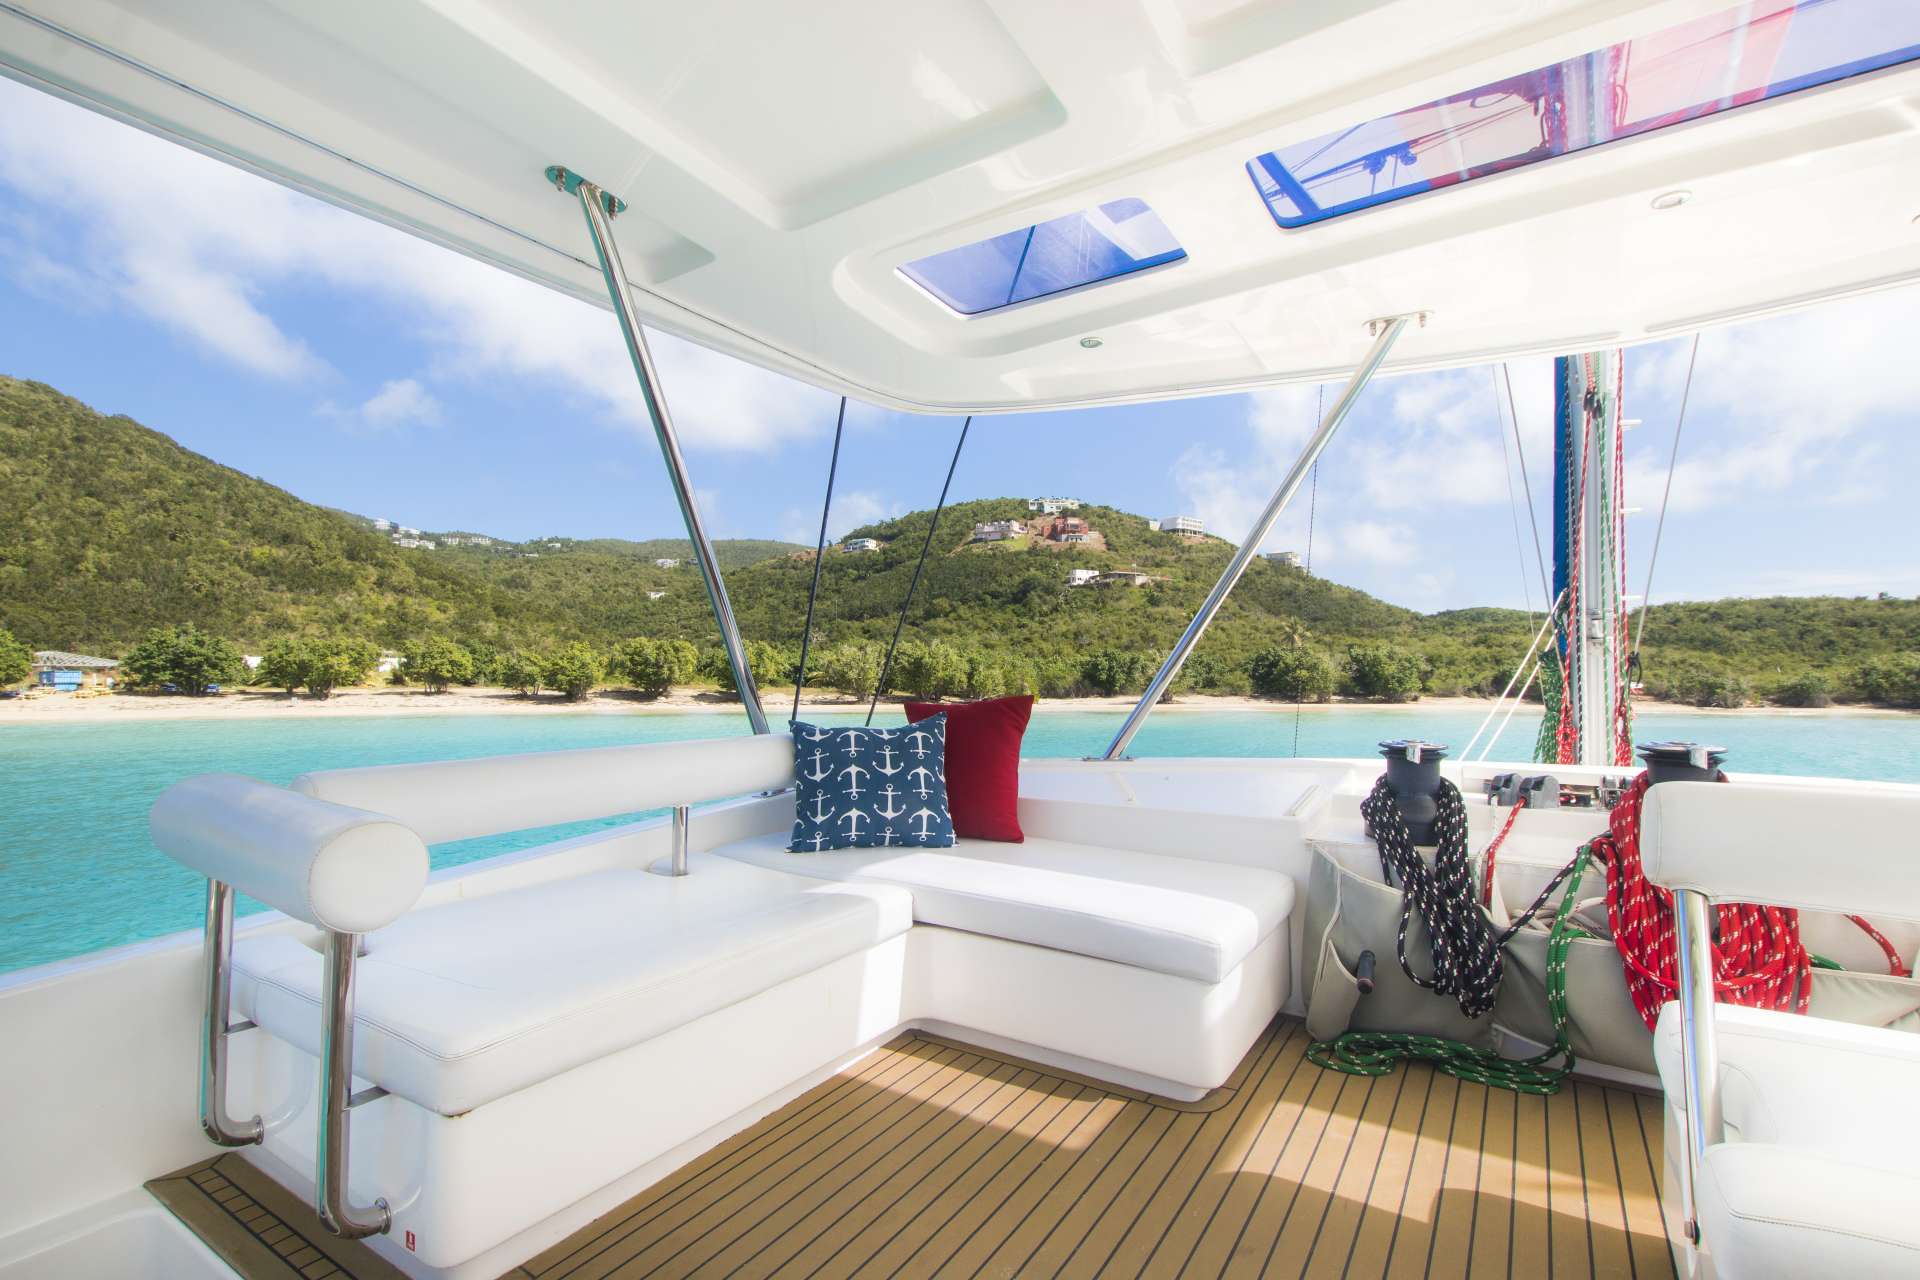 The flybridge has ample seating and provides a shaded, breezy area for happy hour.